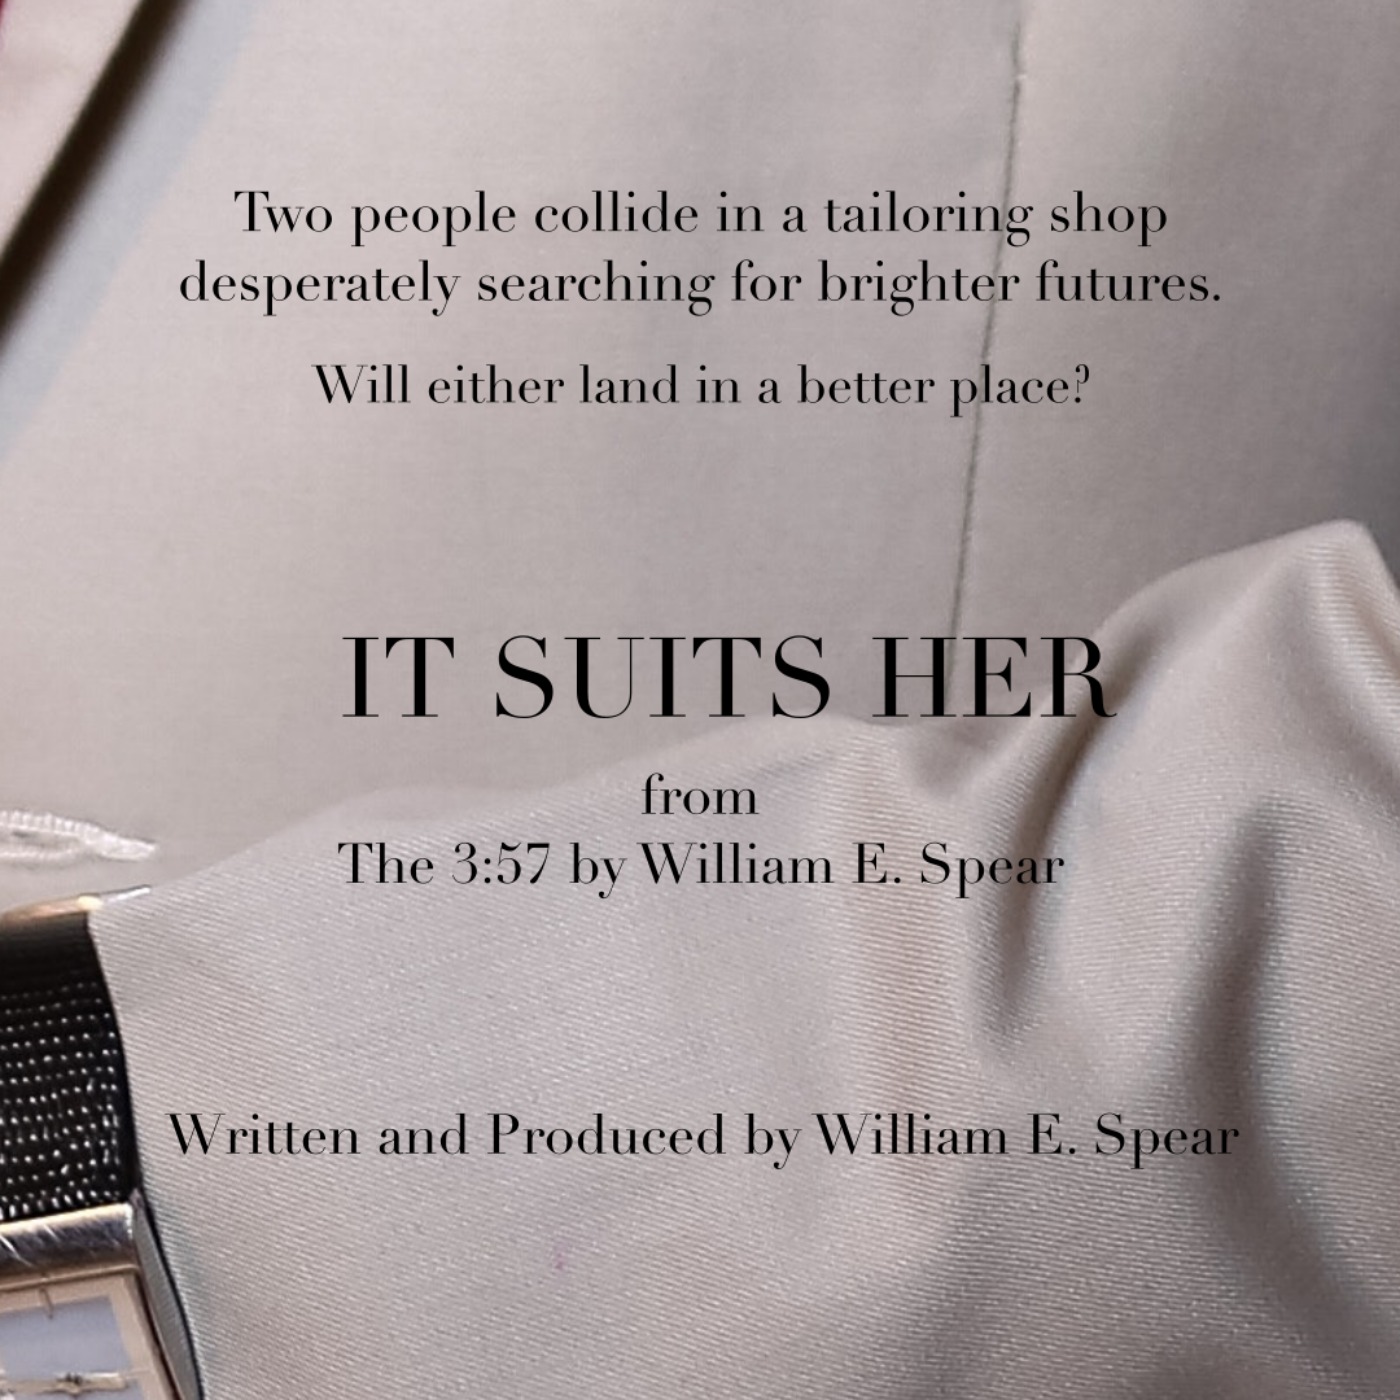 "The 3:57 by William E. Spear" Podcast